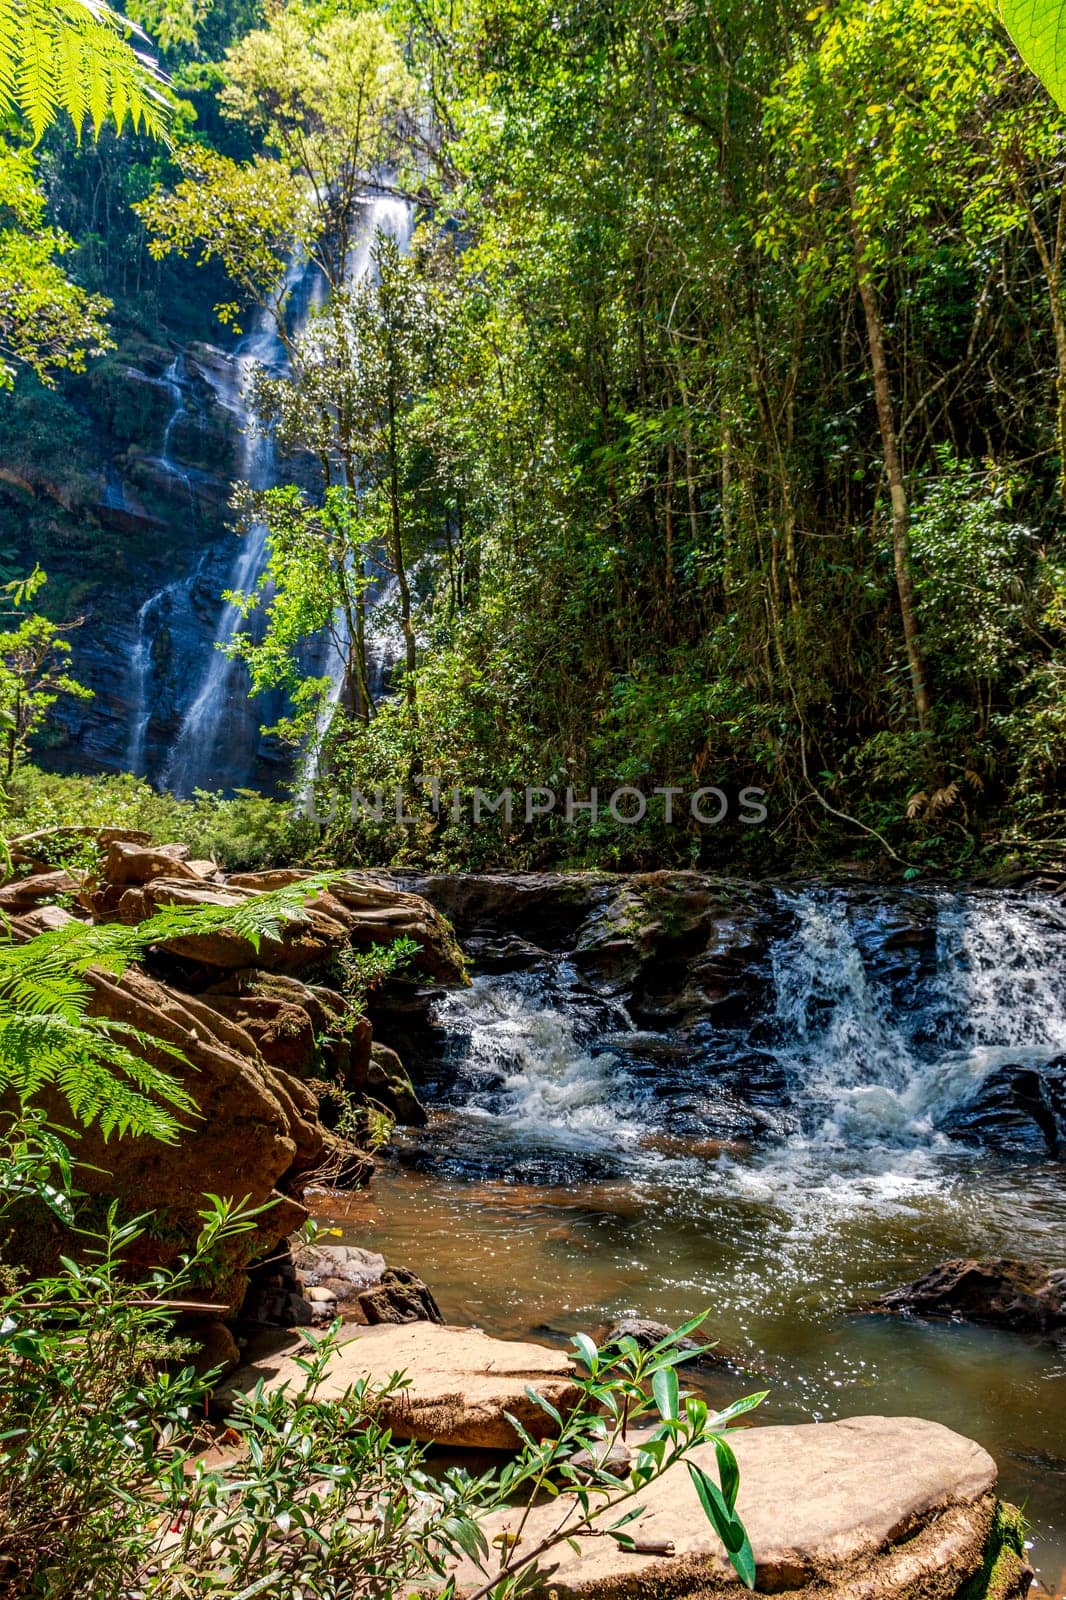 River and waterfall through dense rainforest vegetation in the state of Minas Gerais, Brazil